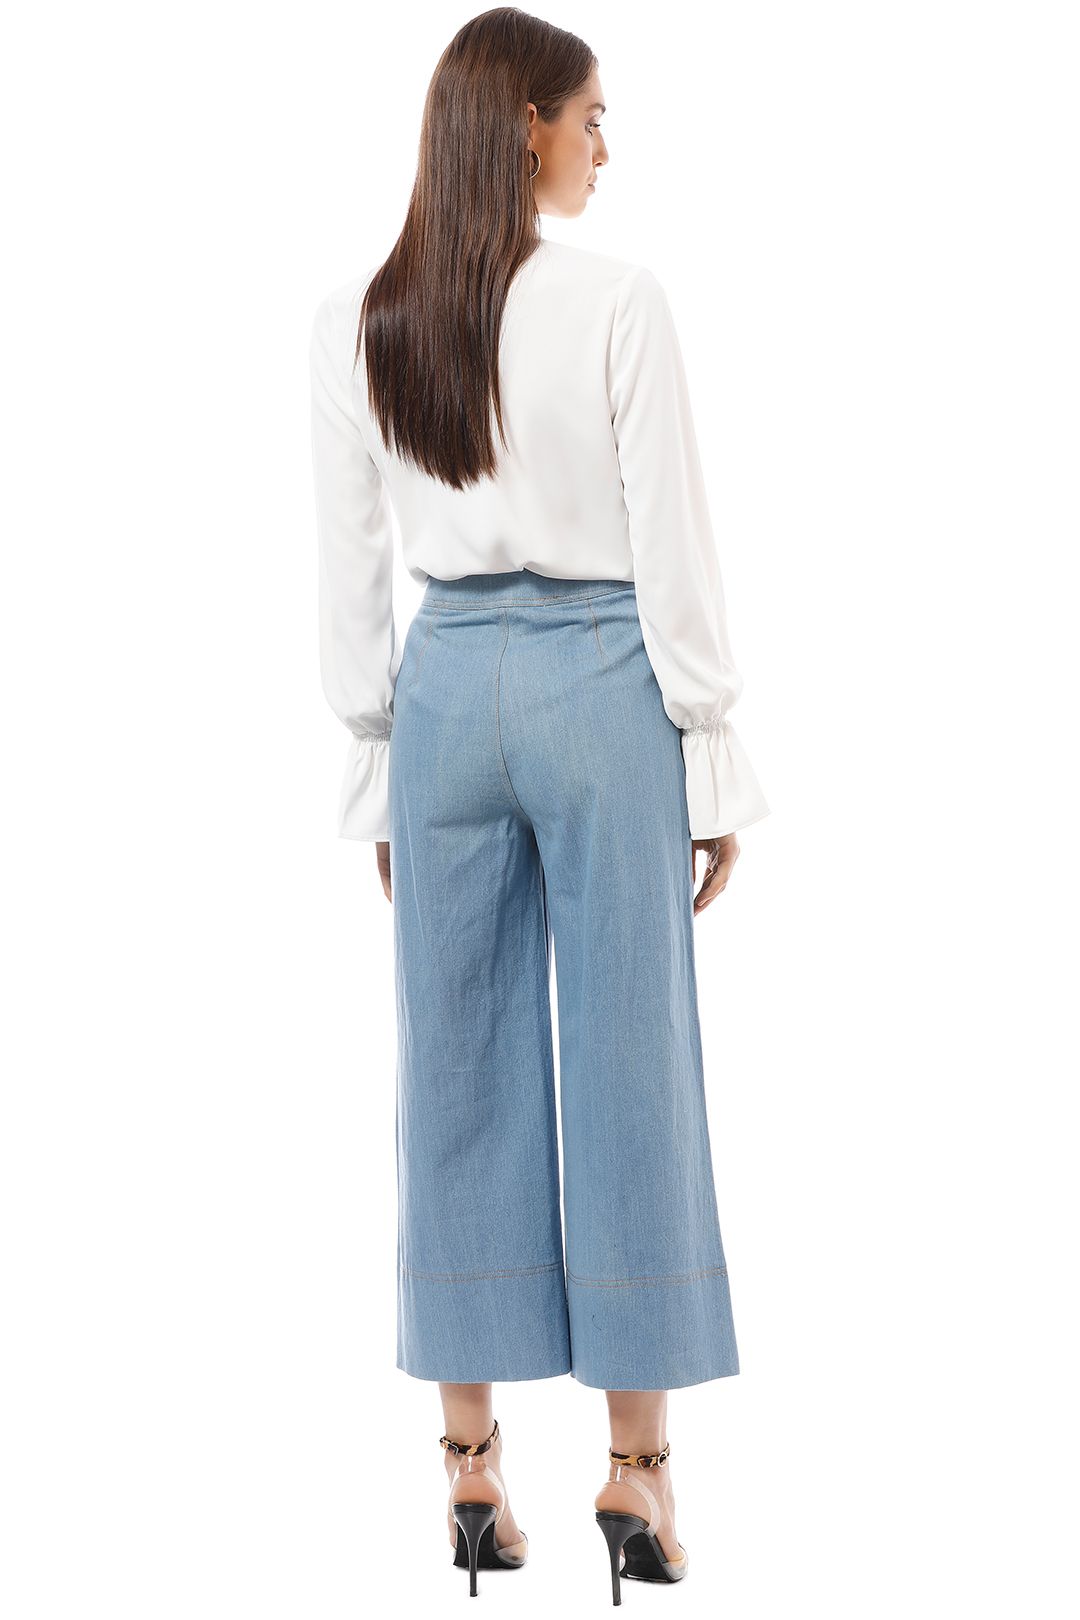 CMEO Collective - Adept Pants - Blue - Back